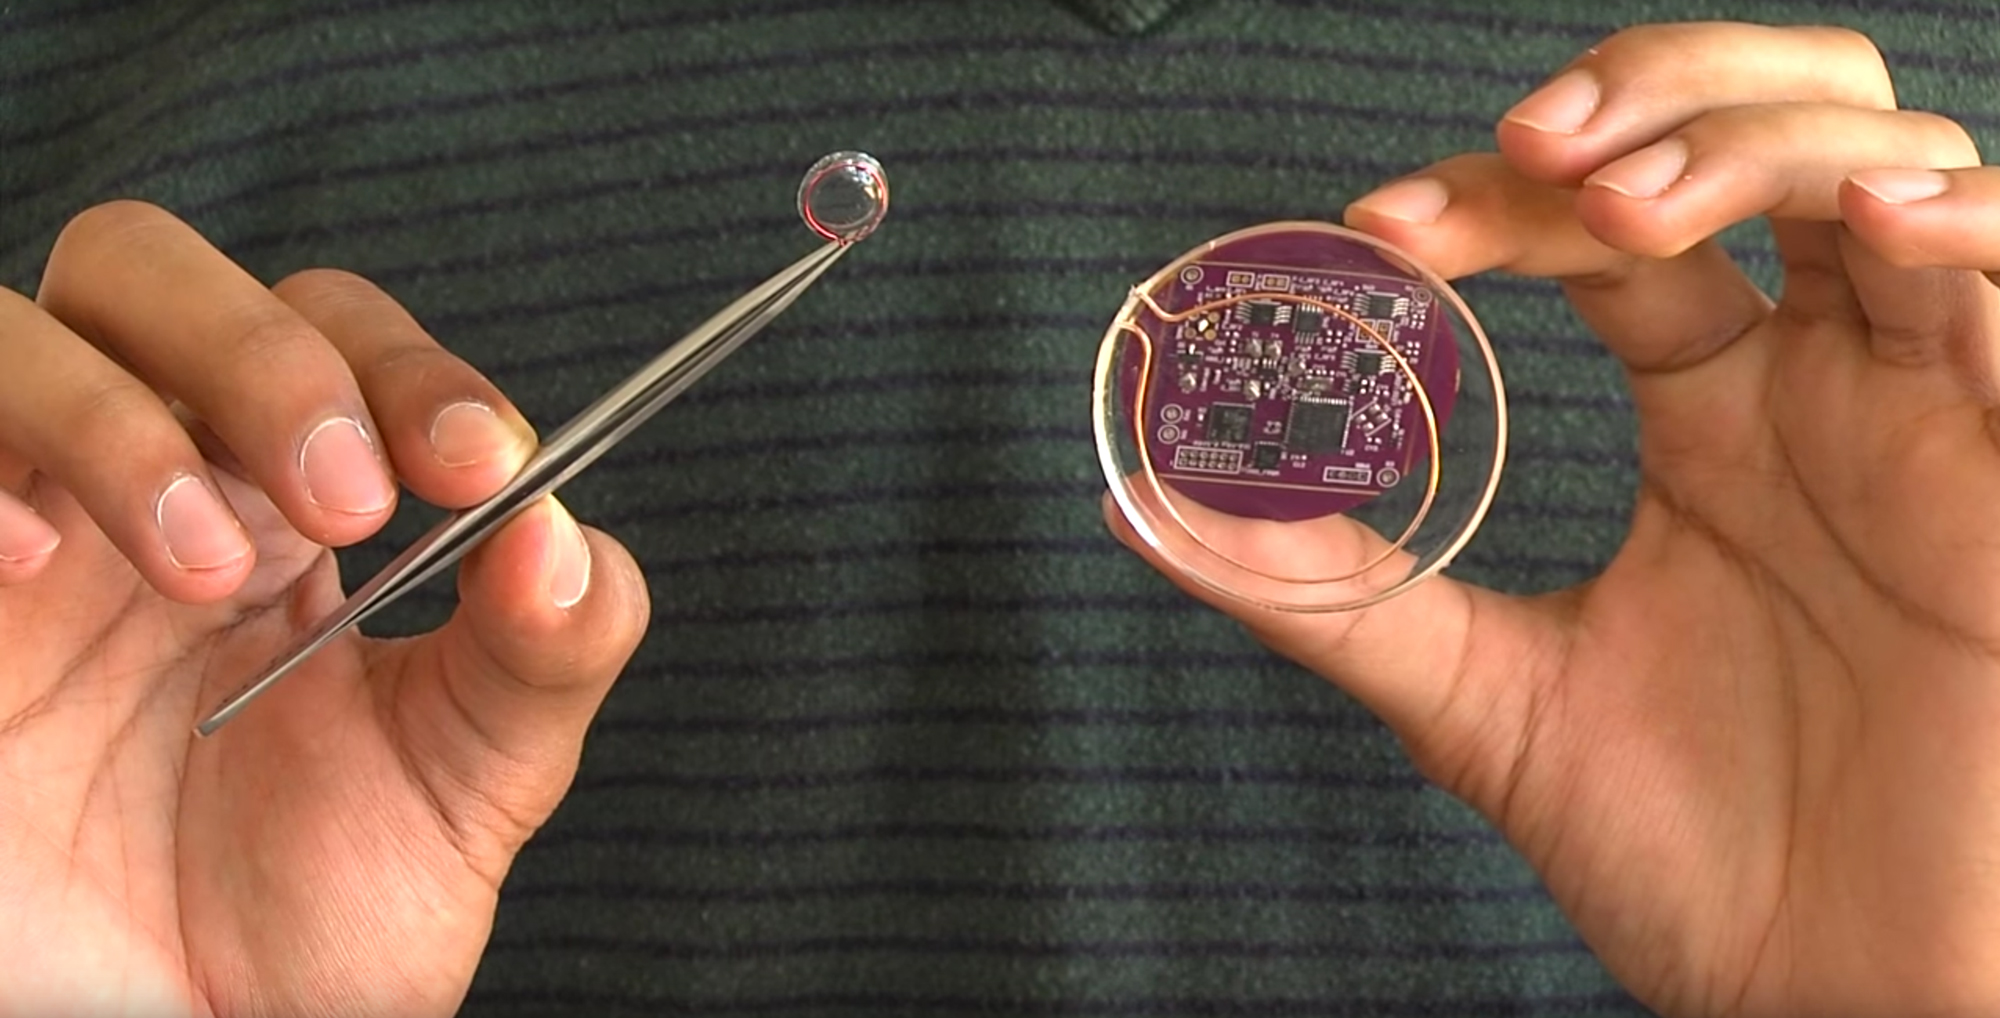 A prototype contact lens, left, and brain implant, right, can communicate over Wi-Fi despite lacking batteries.